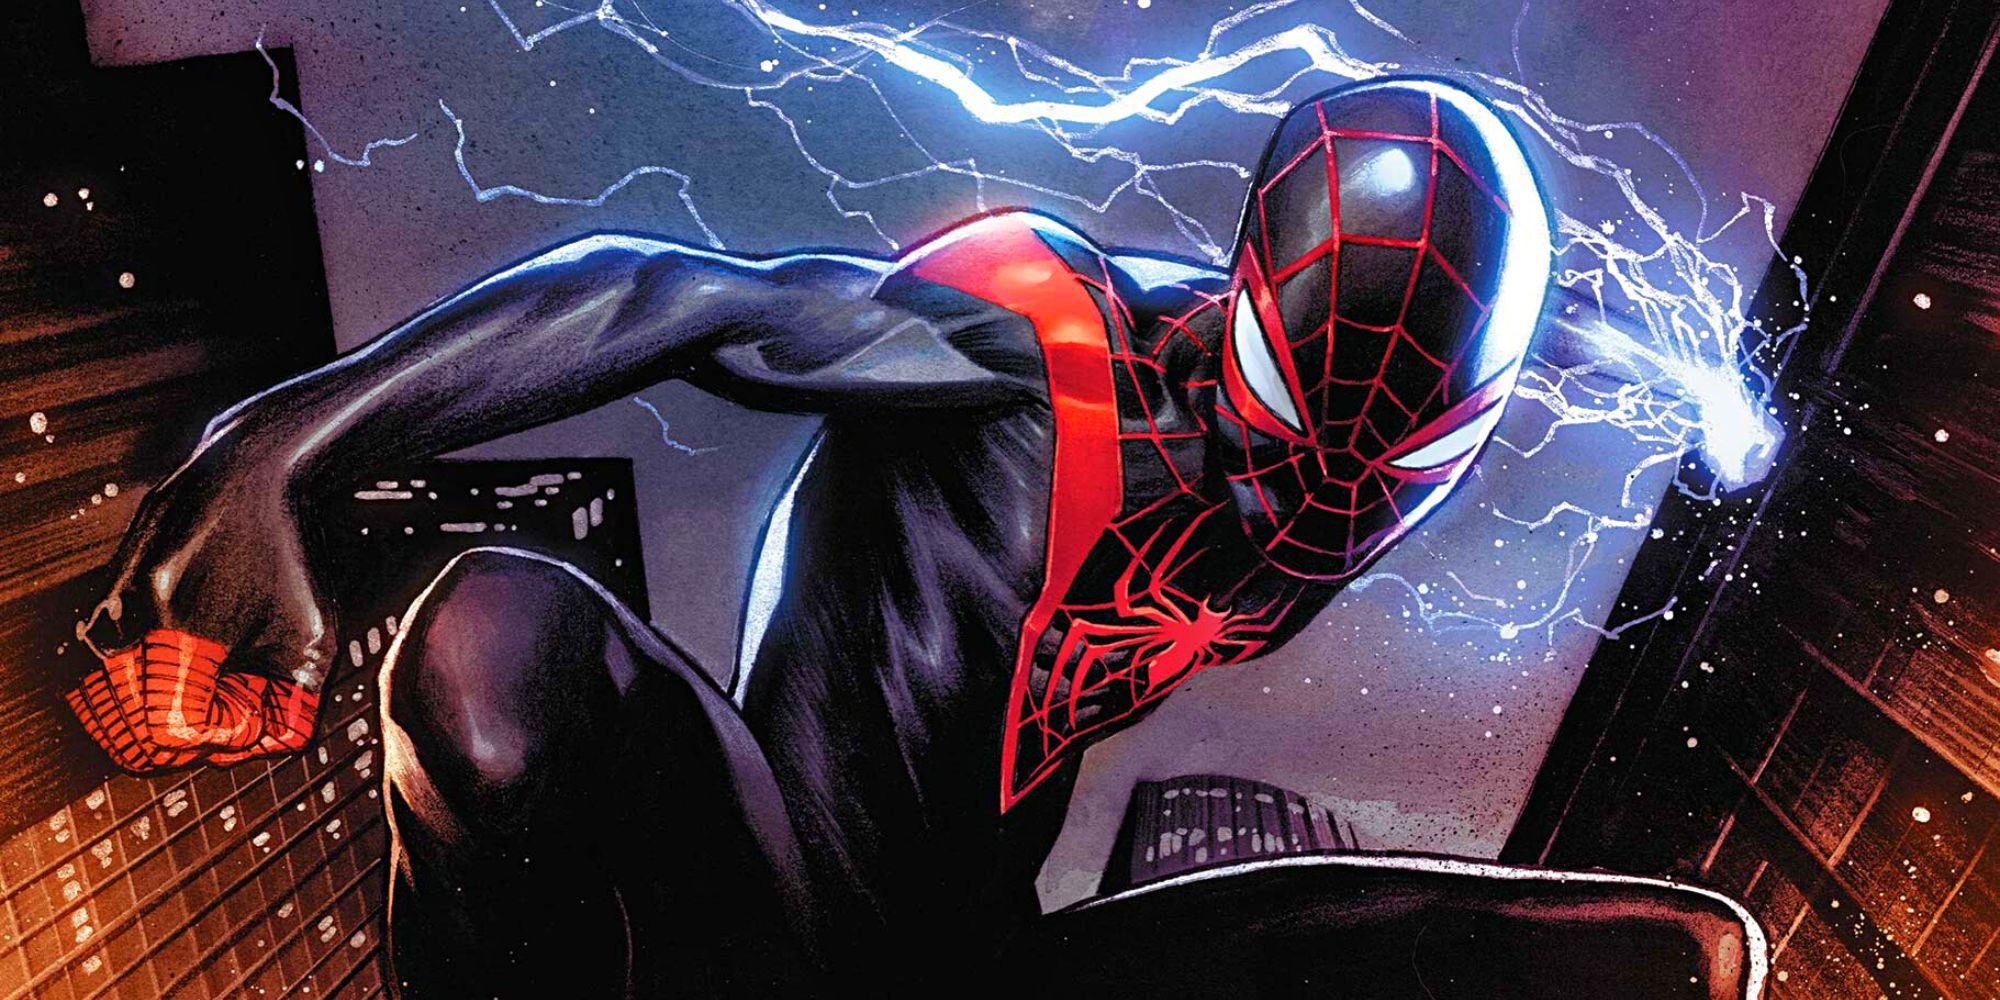 Miles Morales Spider-Man preparing to strike with his electricity fist in Marvel Comics